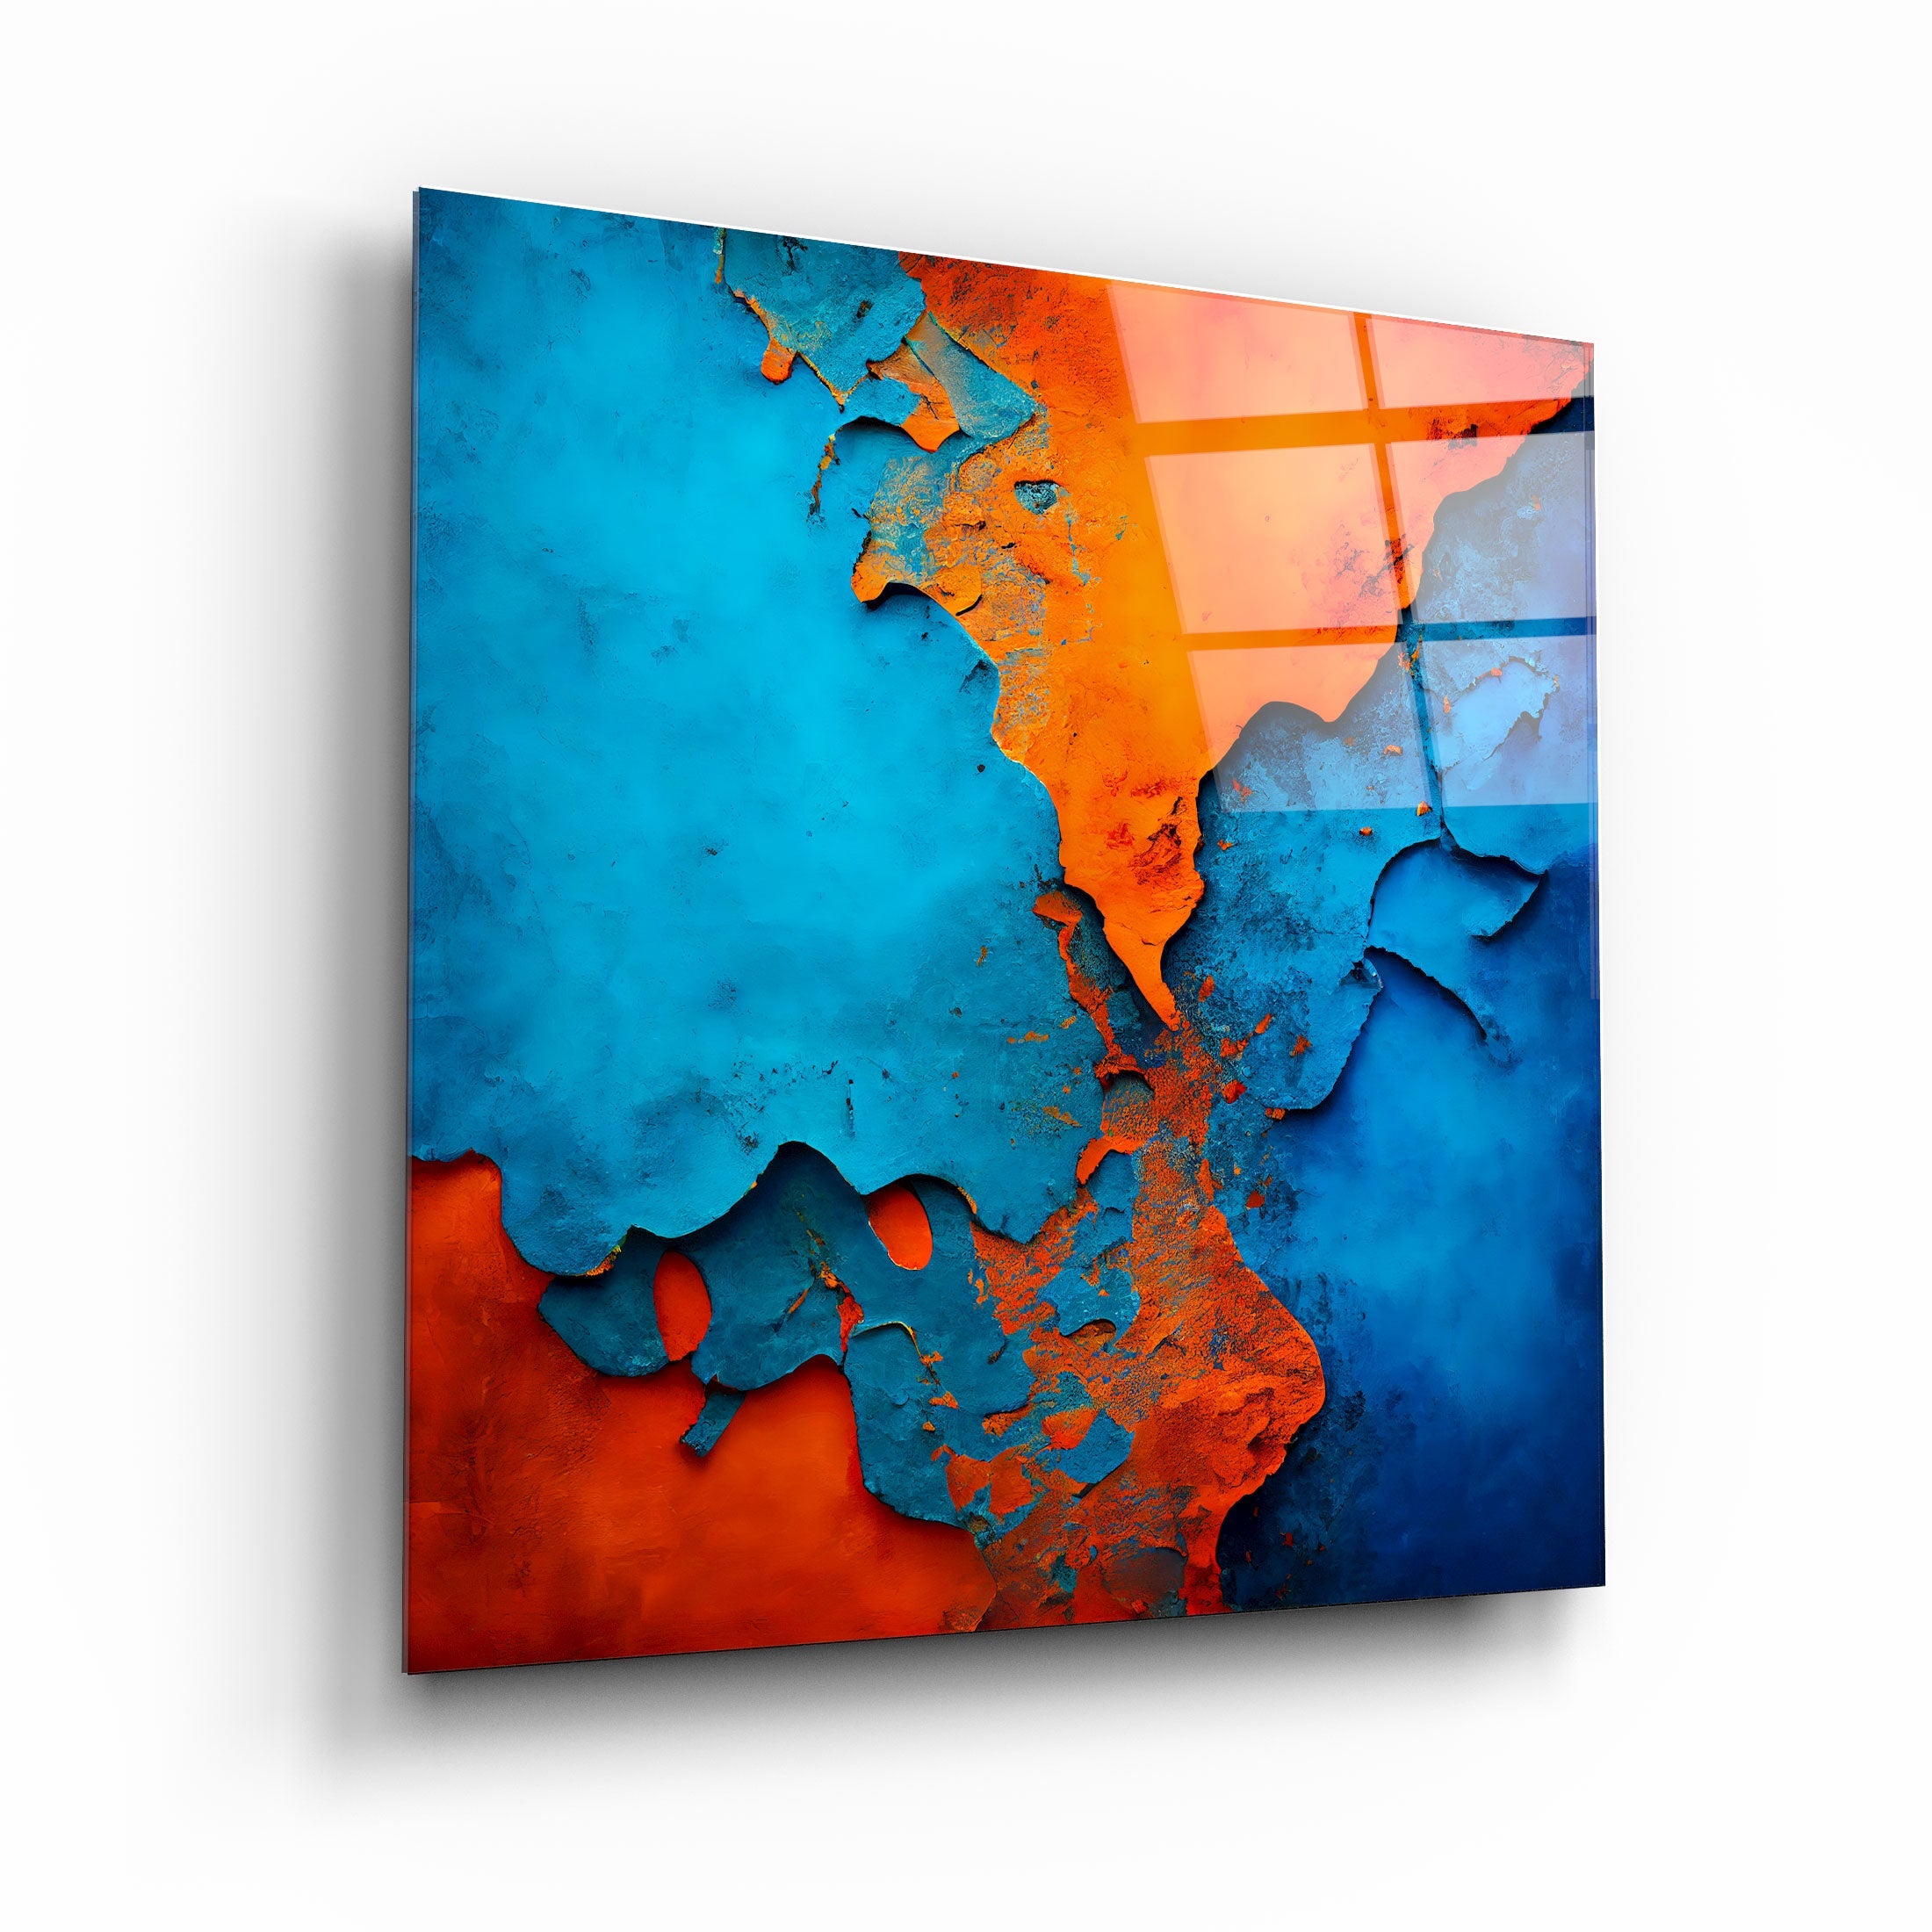 ."Cracked Wall". Designer's Collection Glass Wall Art